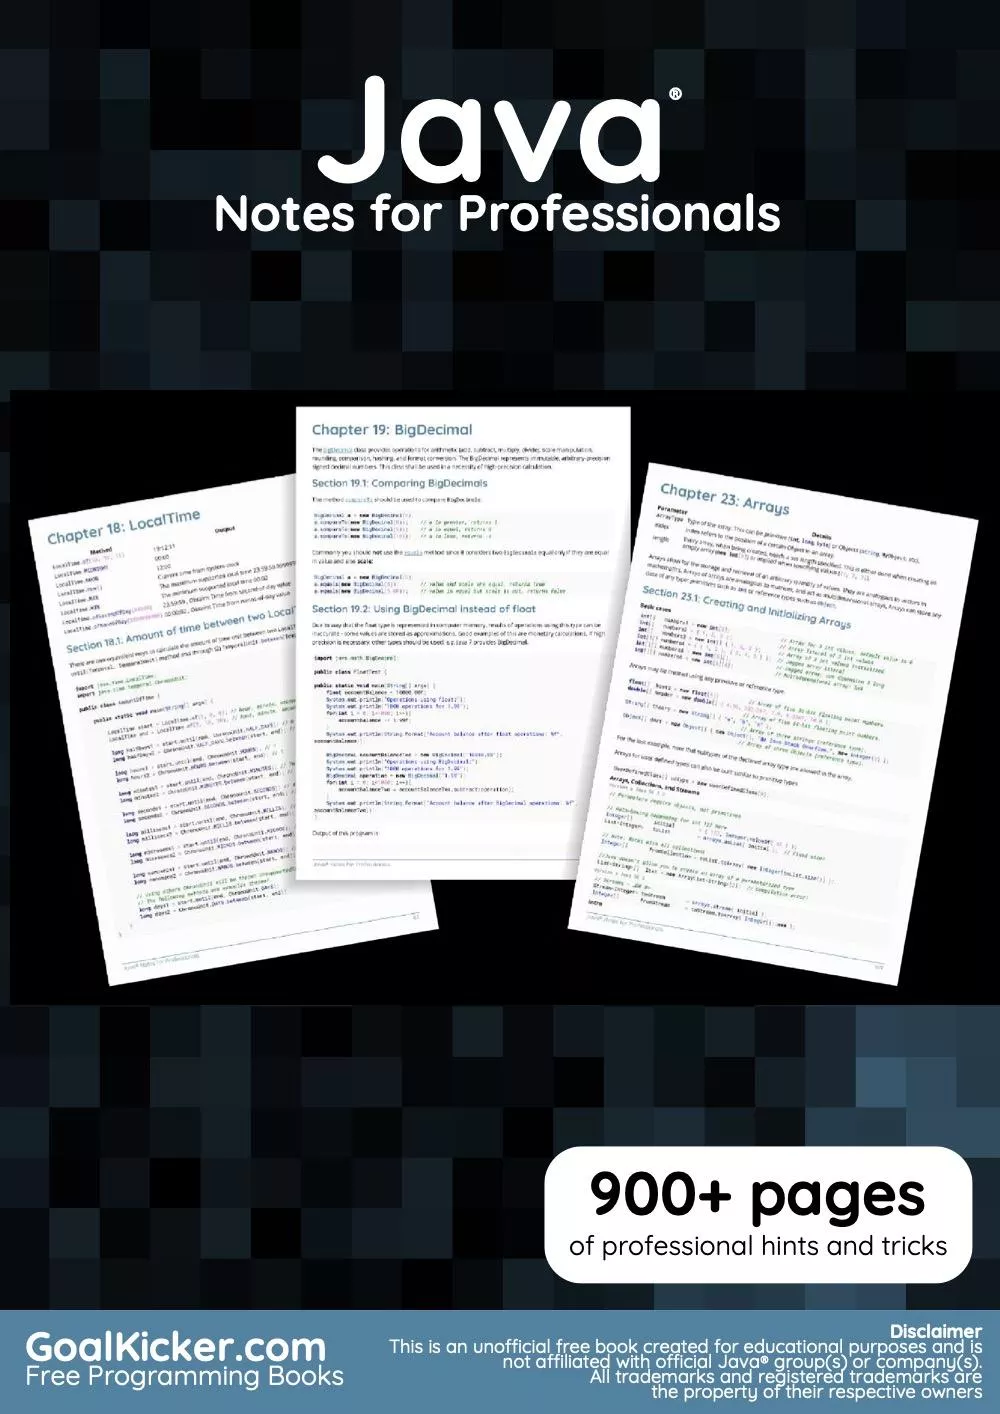 Java® Notes for Professionals